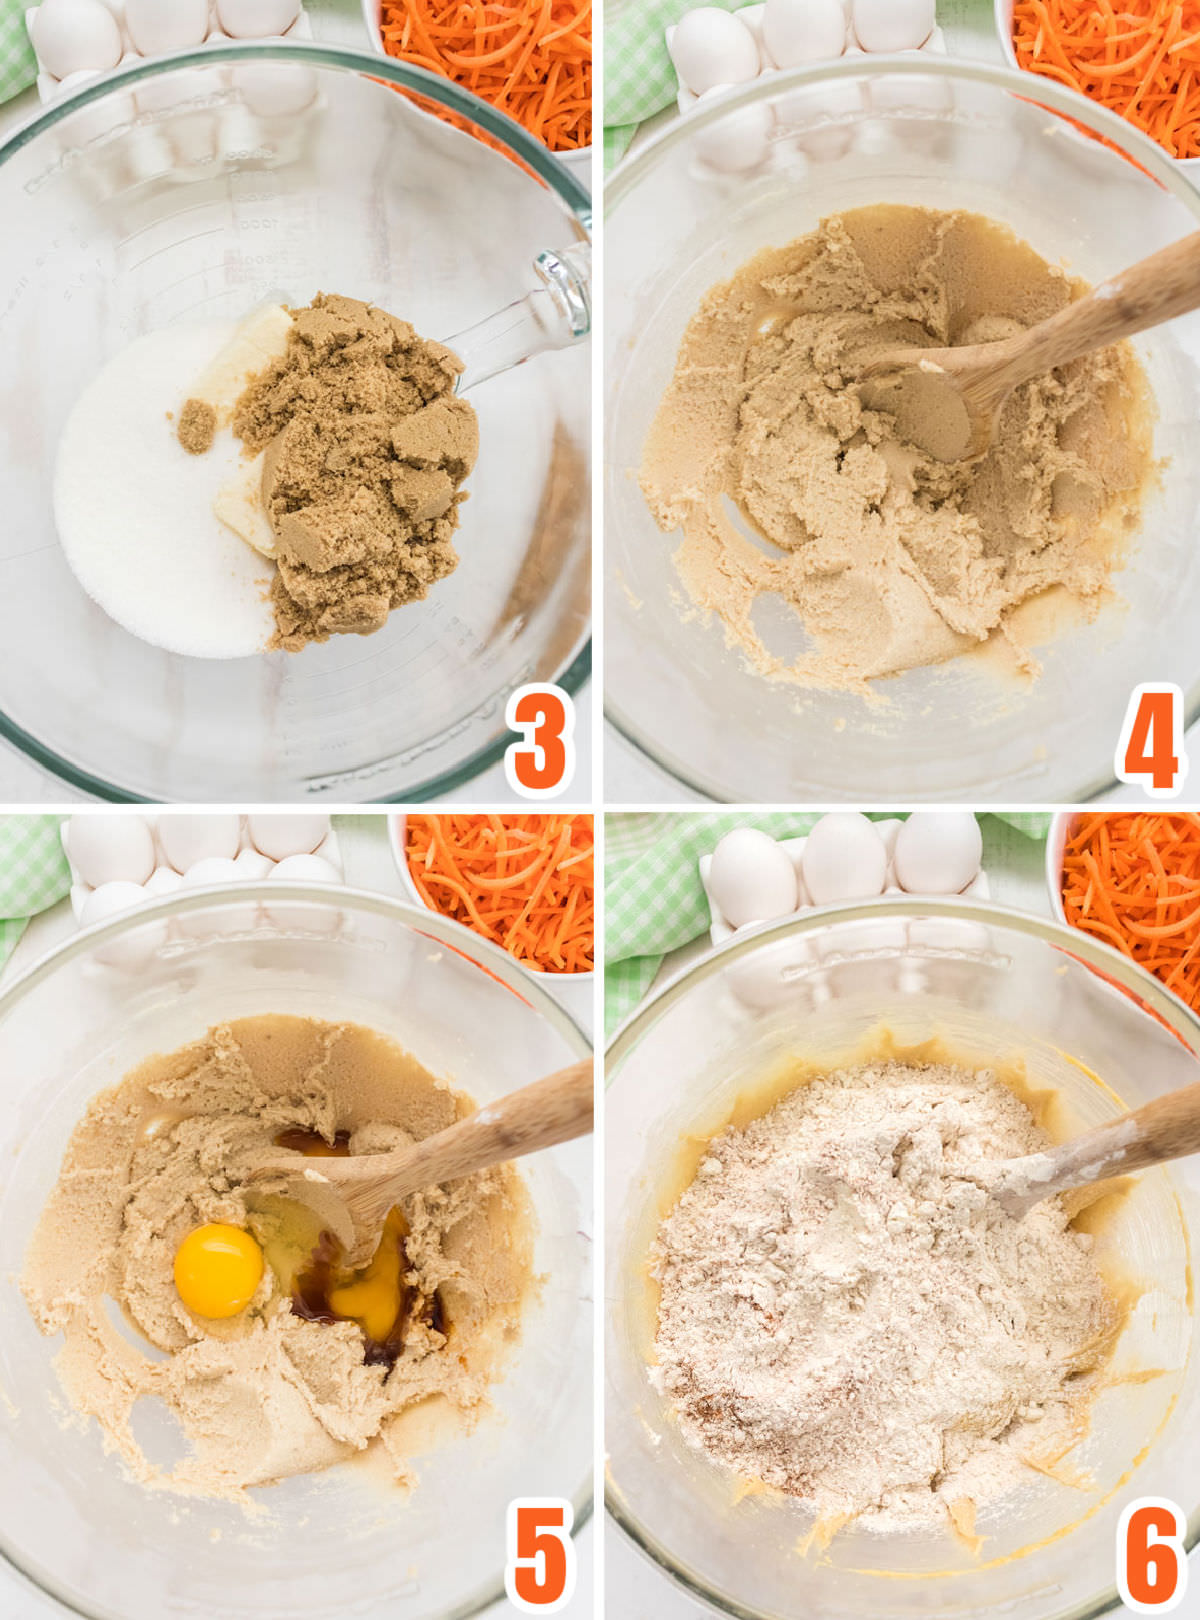 Collage image showing how to make the Carrot Cake cookie dough.